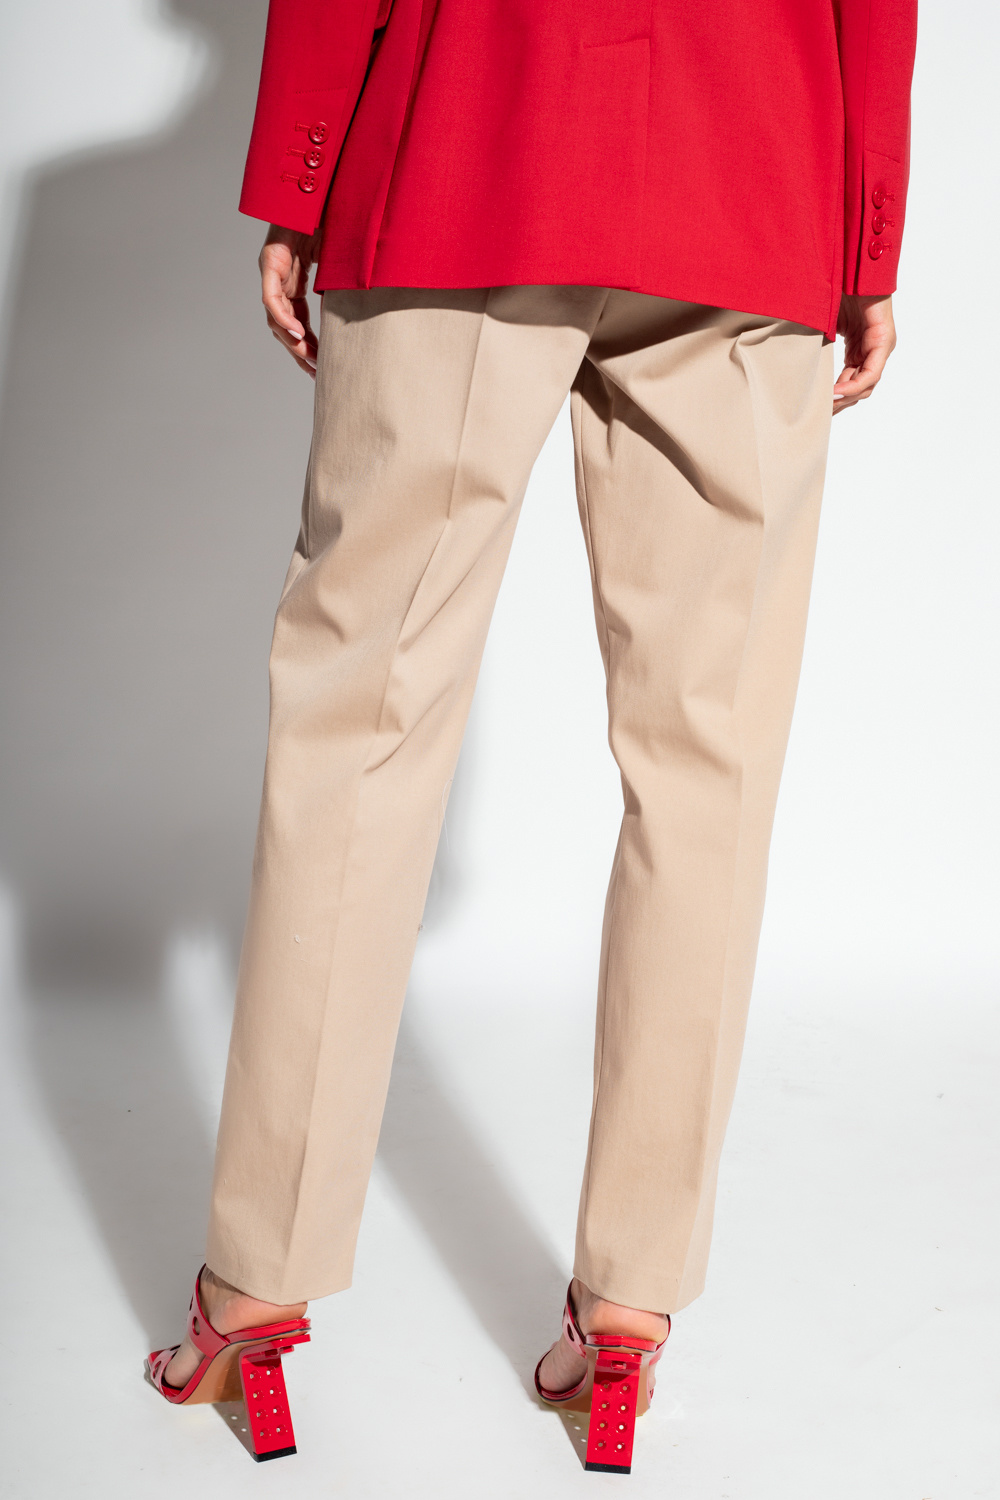 Red Valentino Pleat-front printed trousers